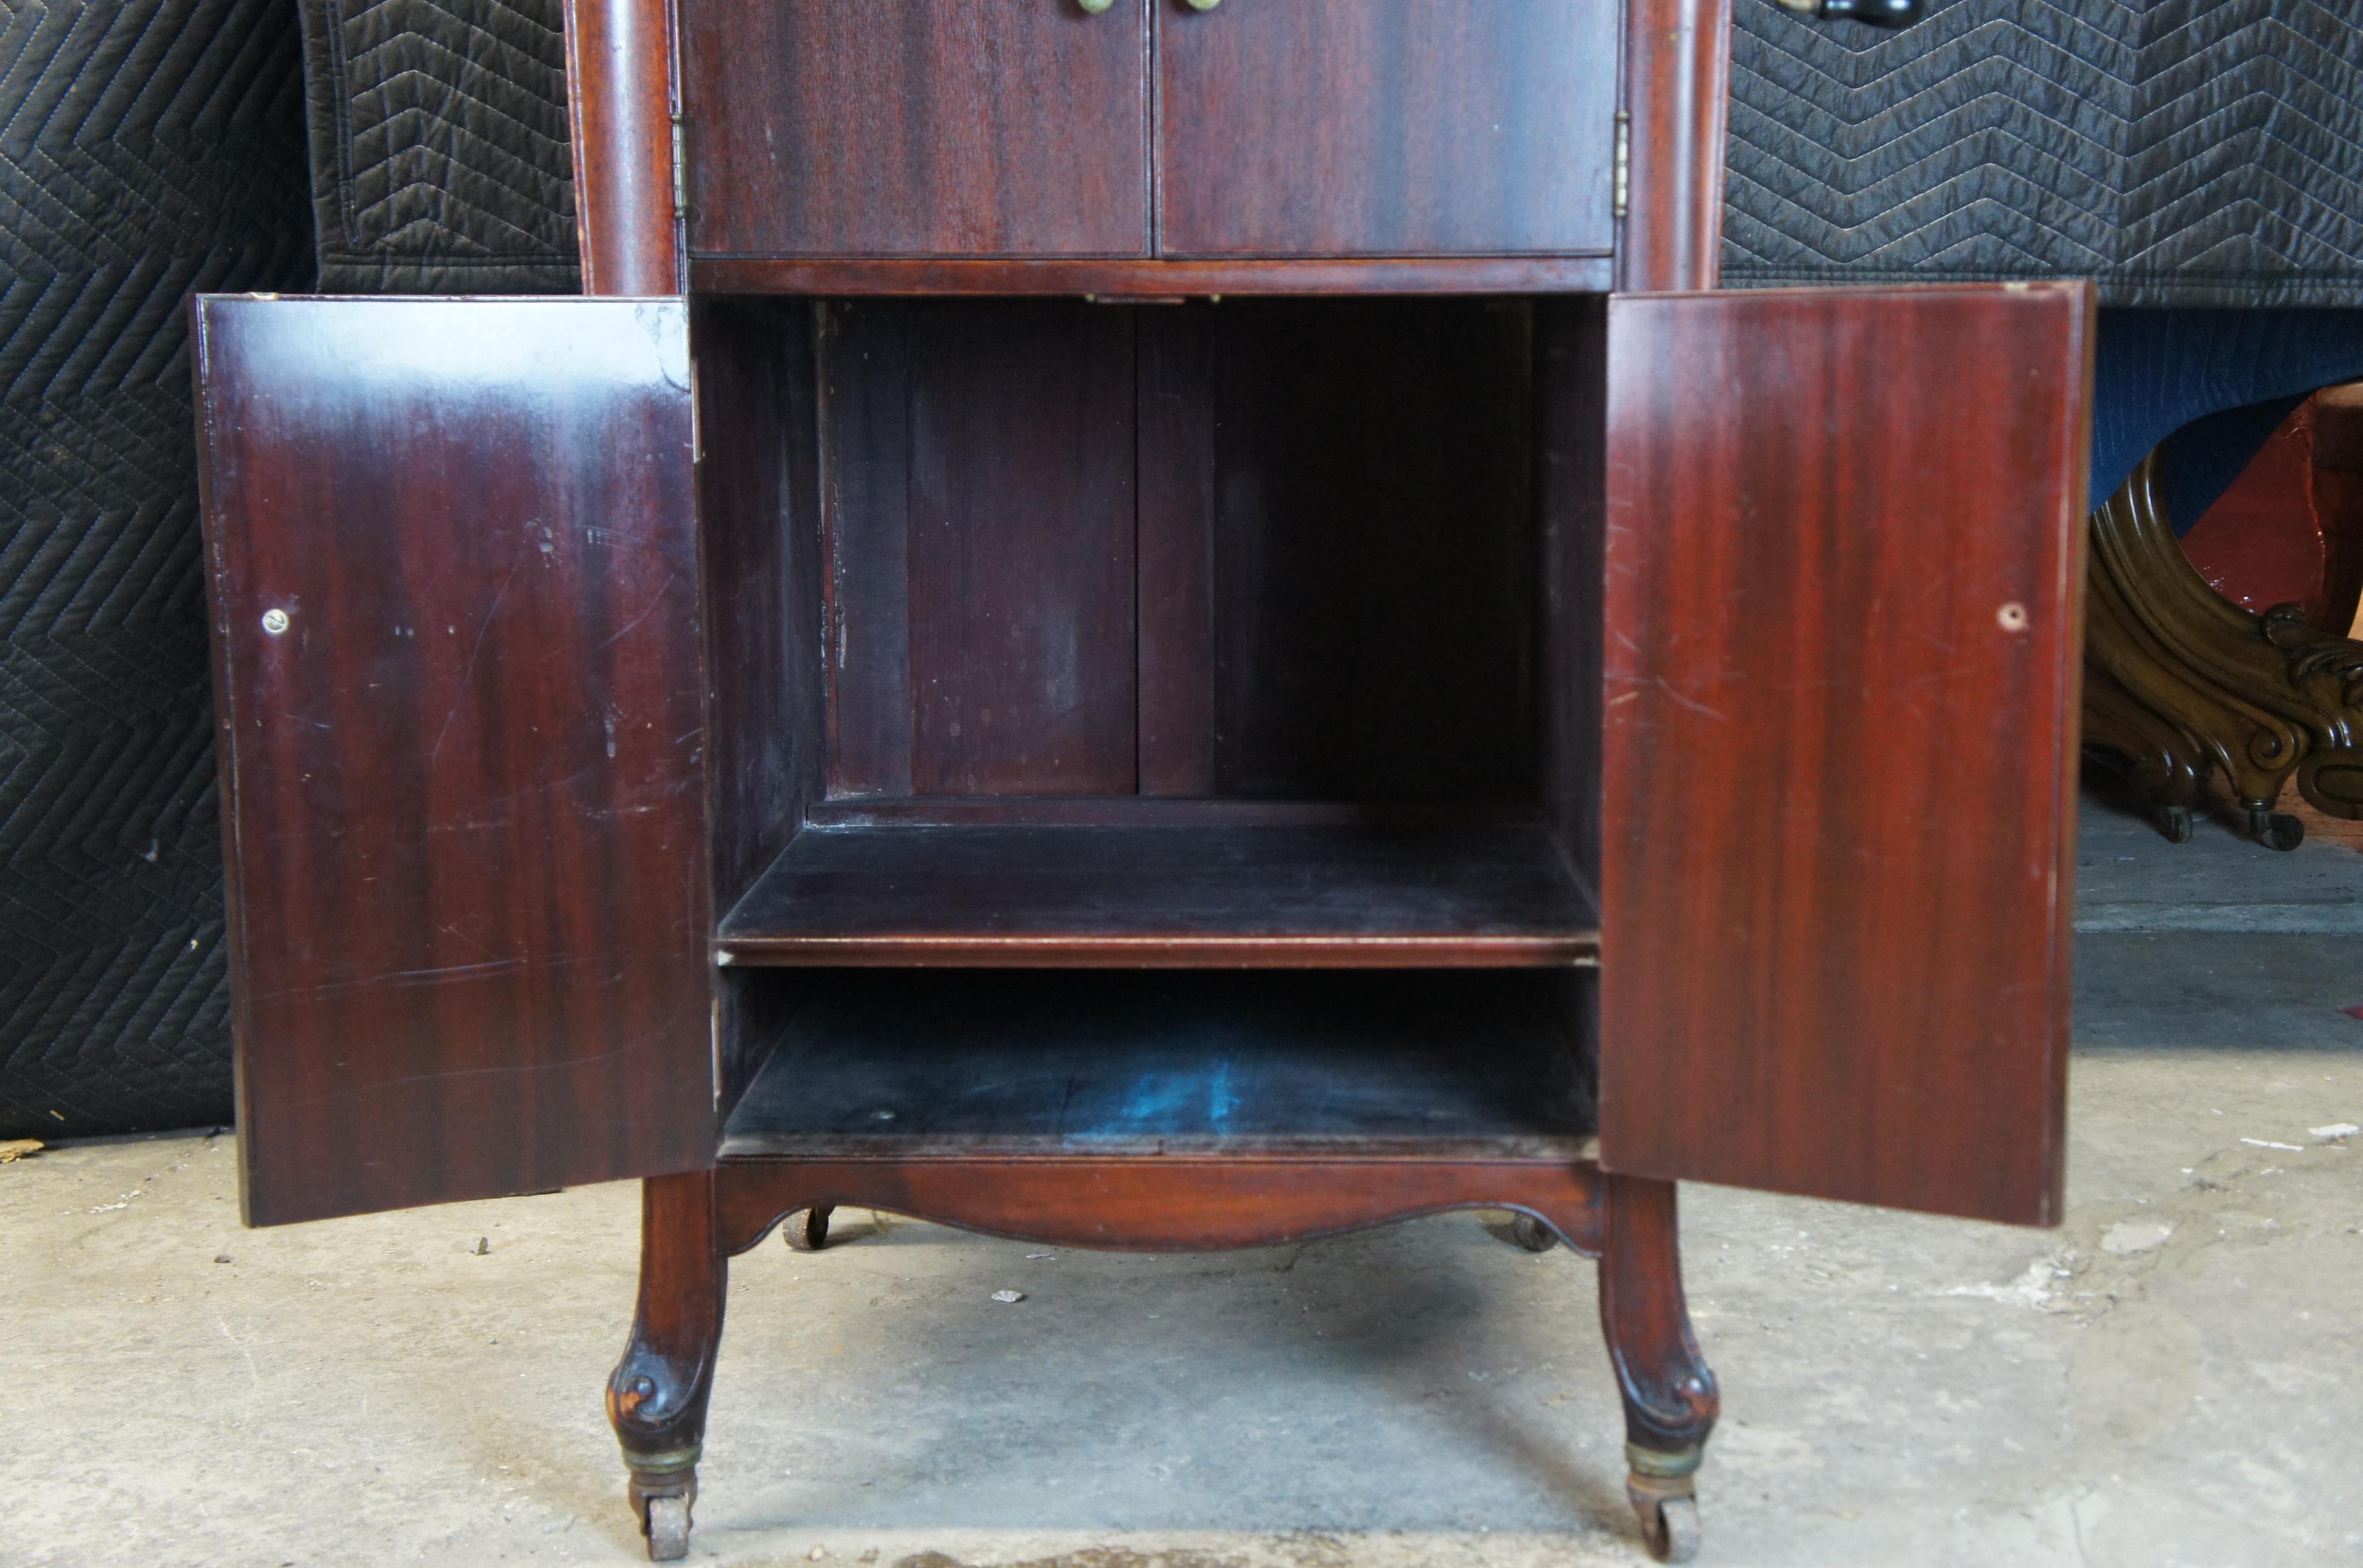 Early 20th Century Antique 1913 Victor Victrola Phonograph Machine Queen Anne Mahogany VV-XIV